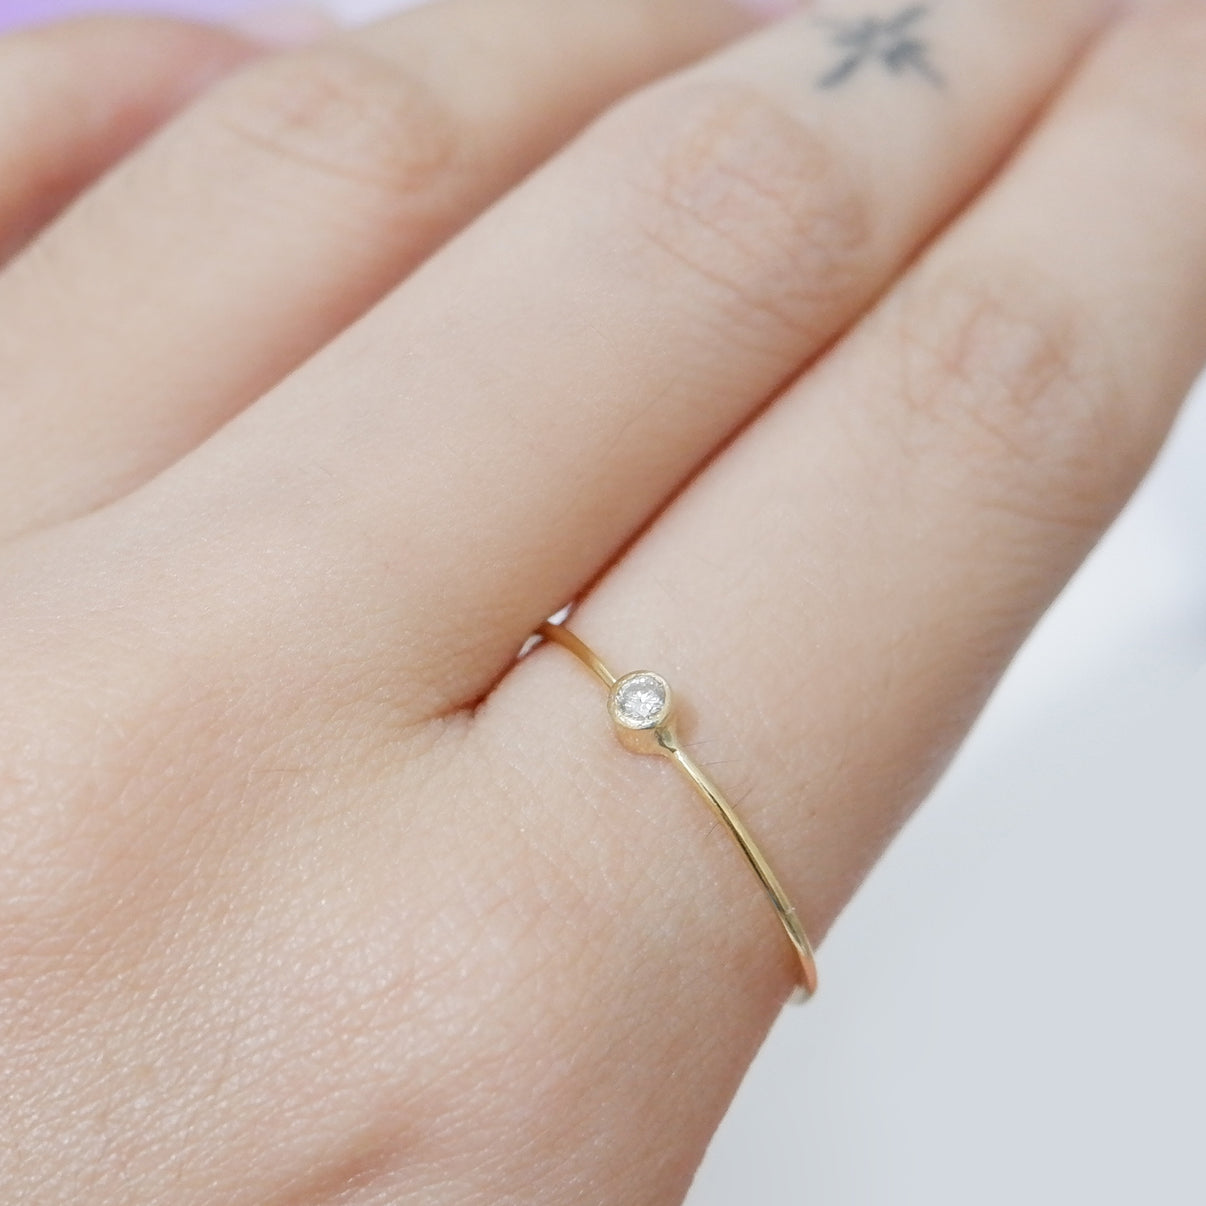 The Classic Birthstone Ring in Solid Gold